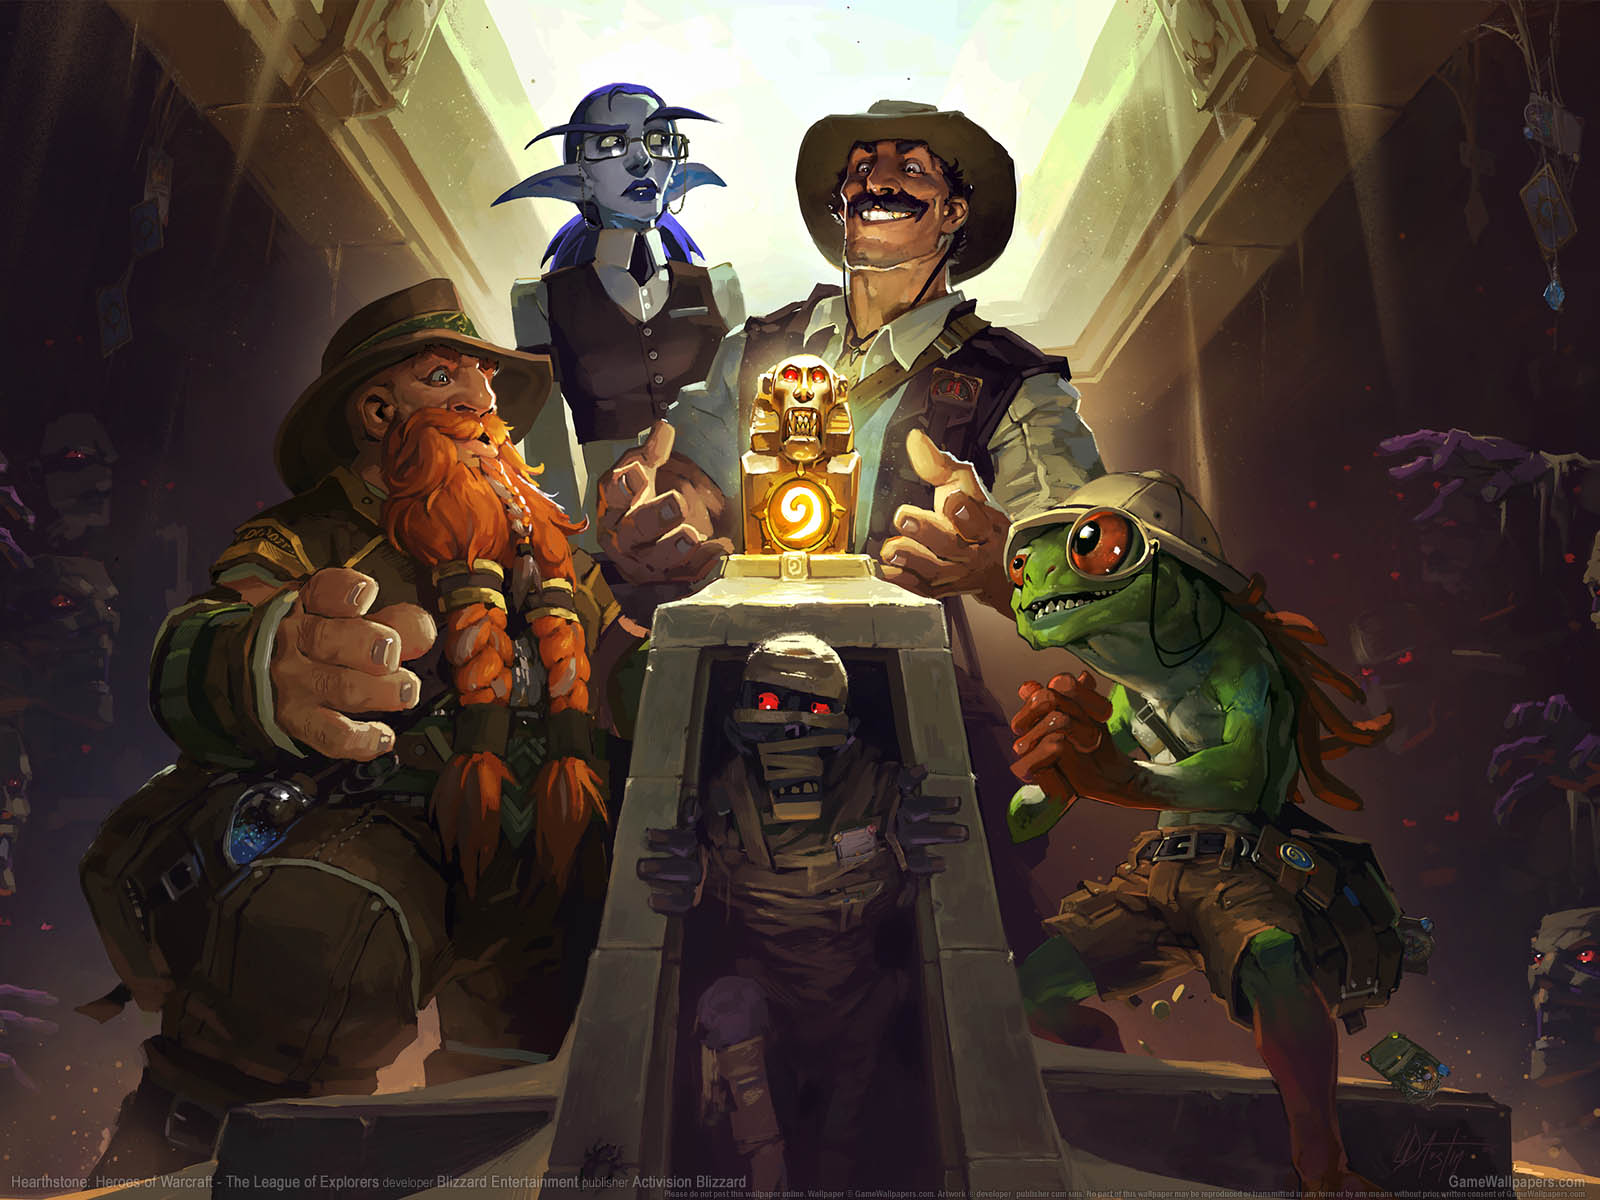 Hearthstone%2525253A Heroes of Warcraft - The League of Explorers wallpaper 01 1600x1200